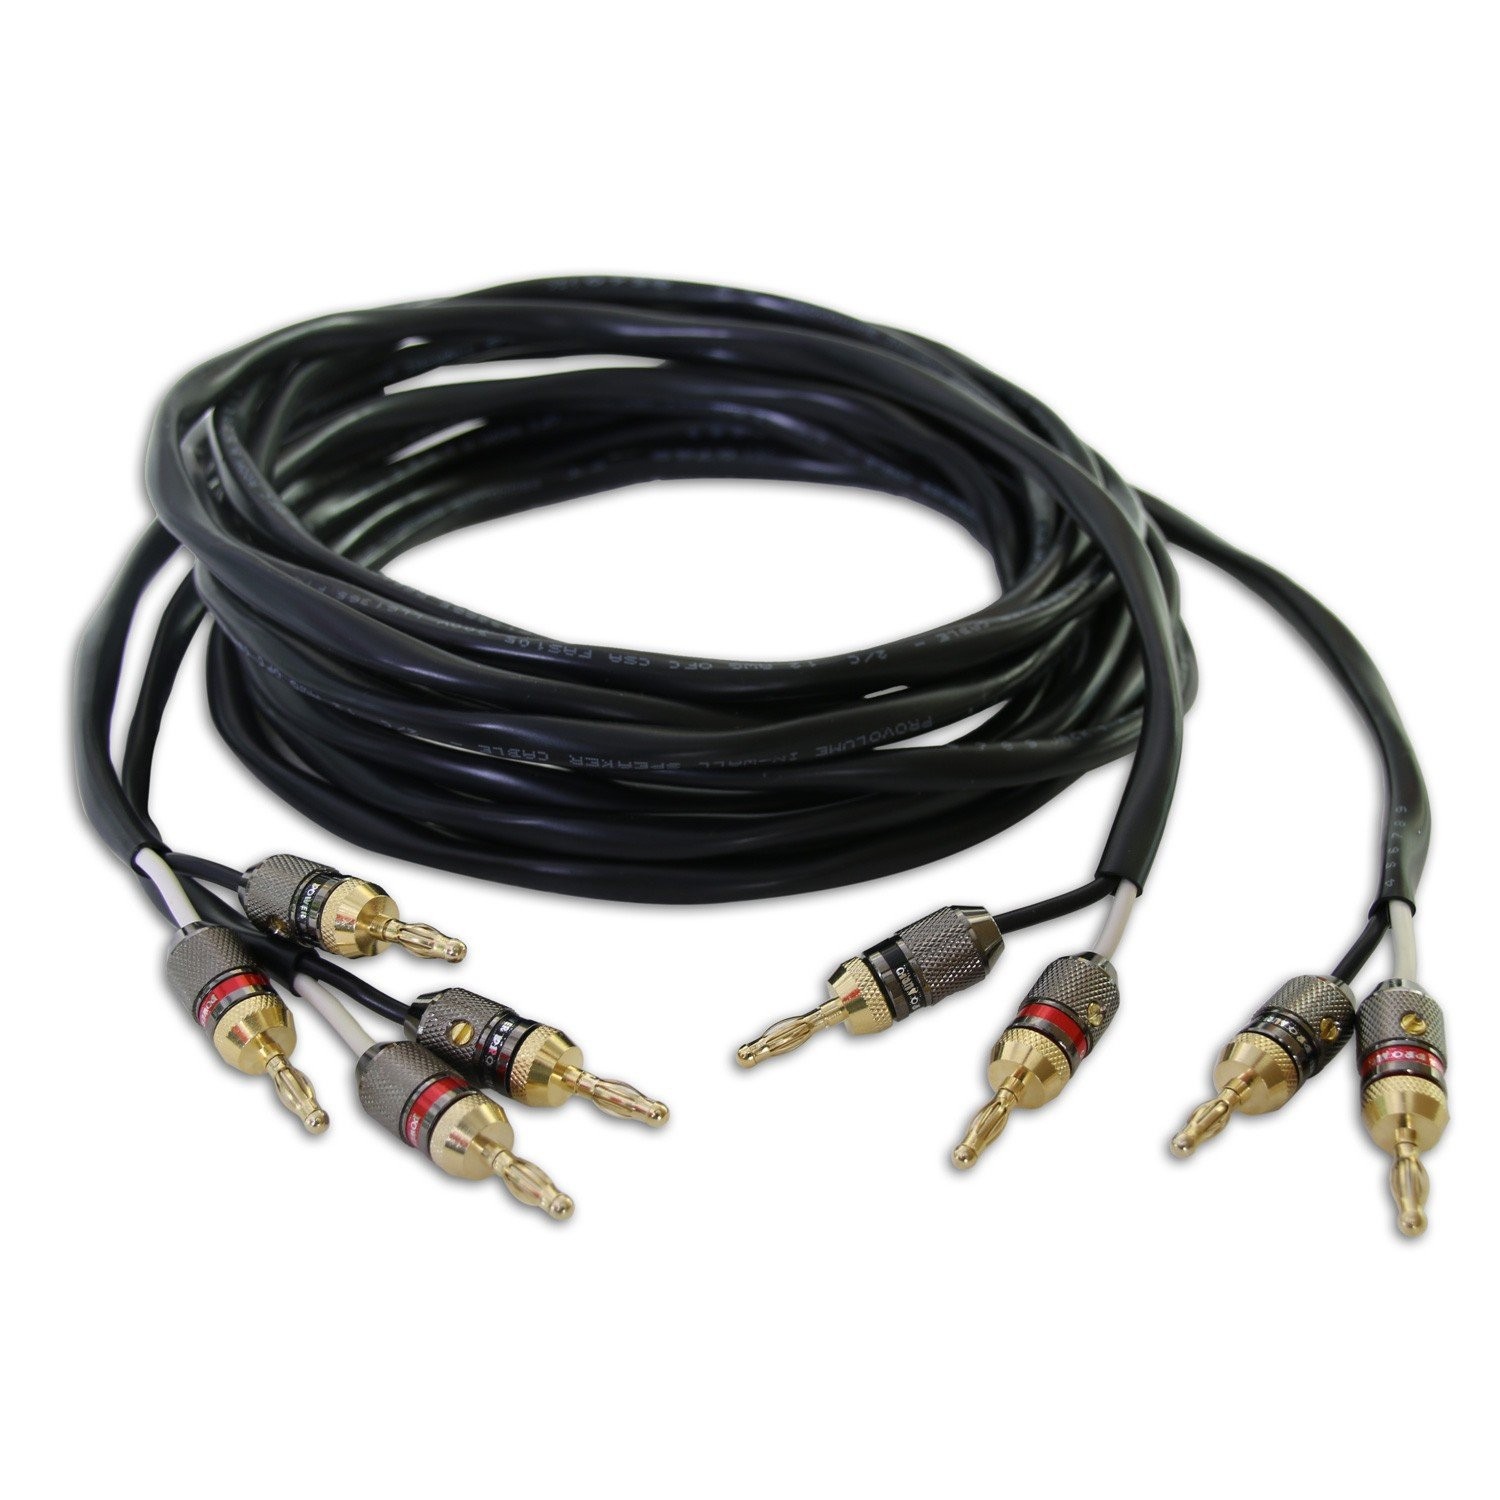 ThruSound HiFi-Series 12AWG 2-Conductor Speaker Wire with Premium 24k Gold-Plated Banana Plugs (35 Feet/Pair)